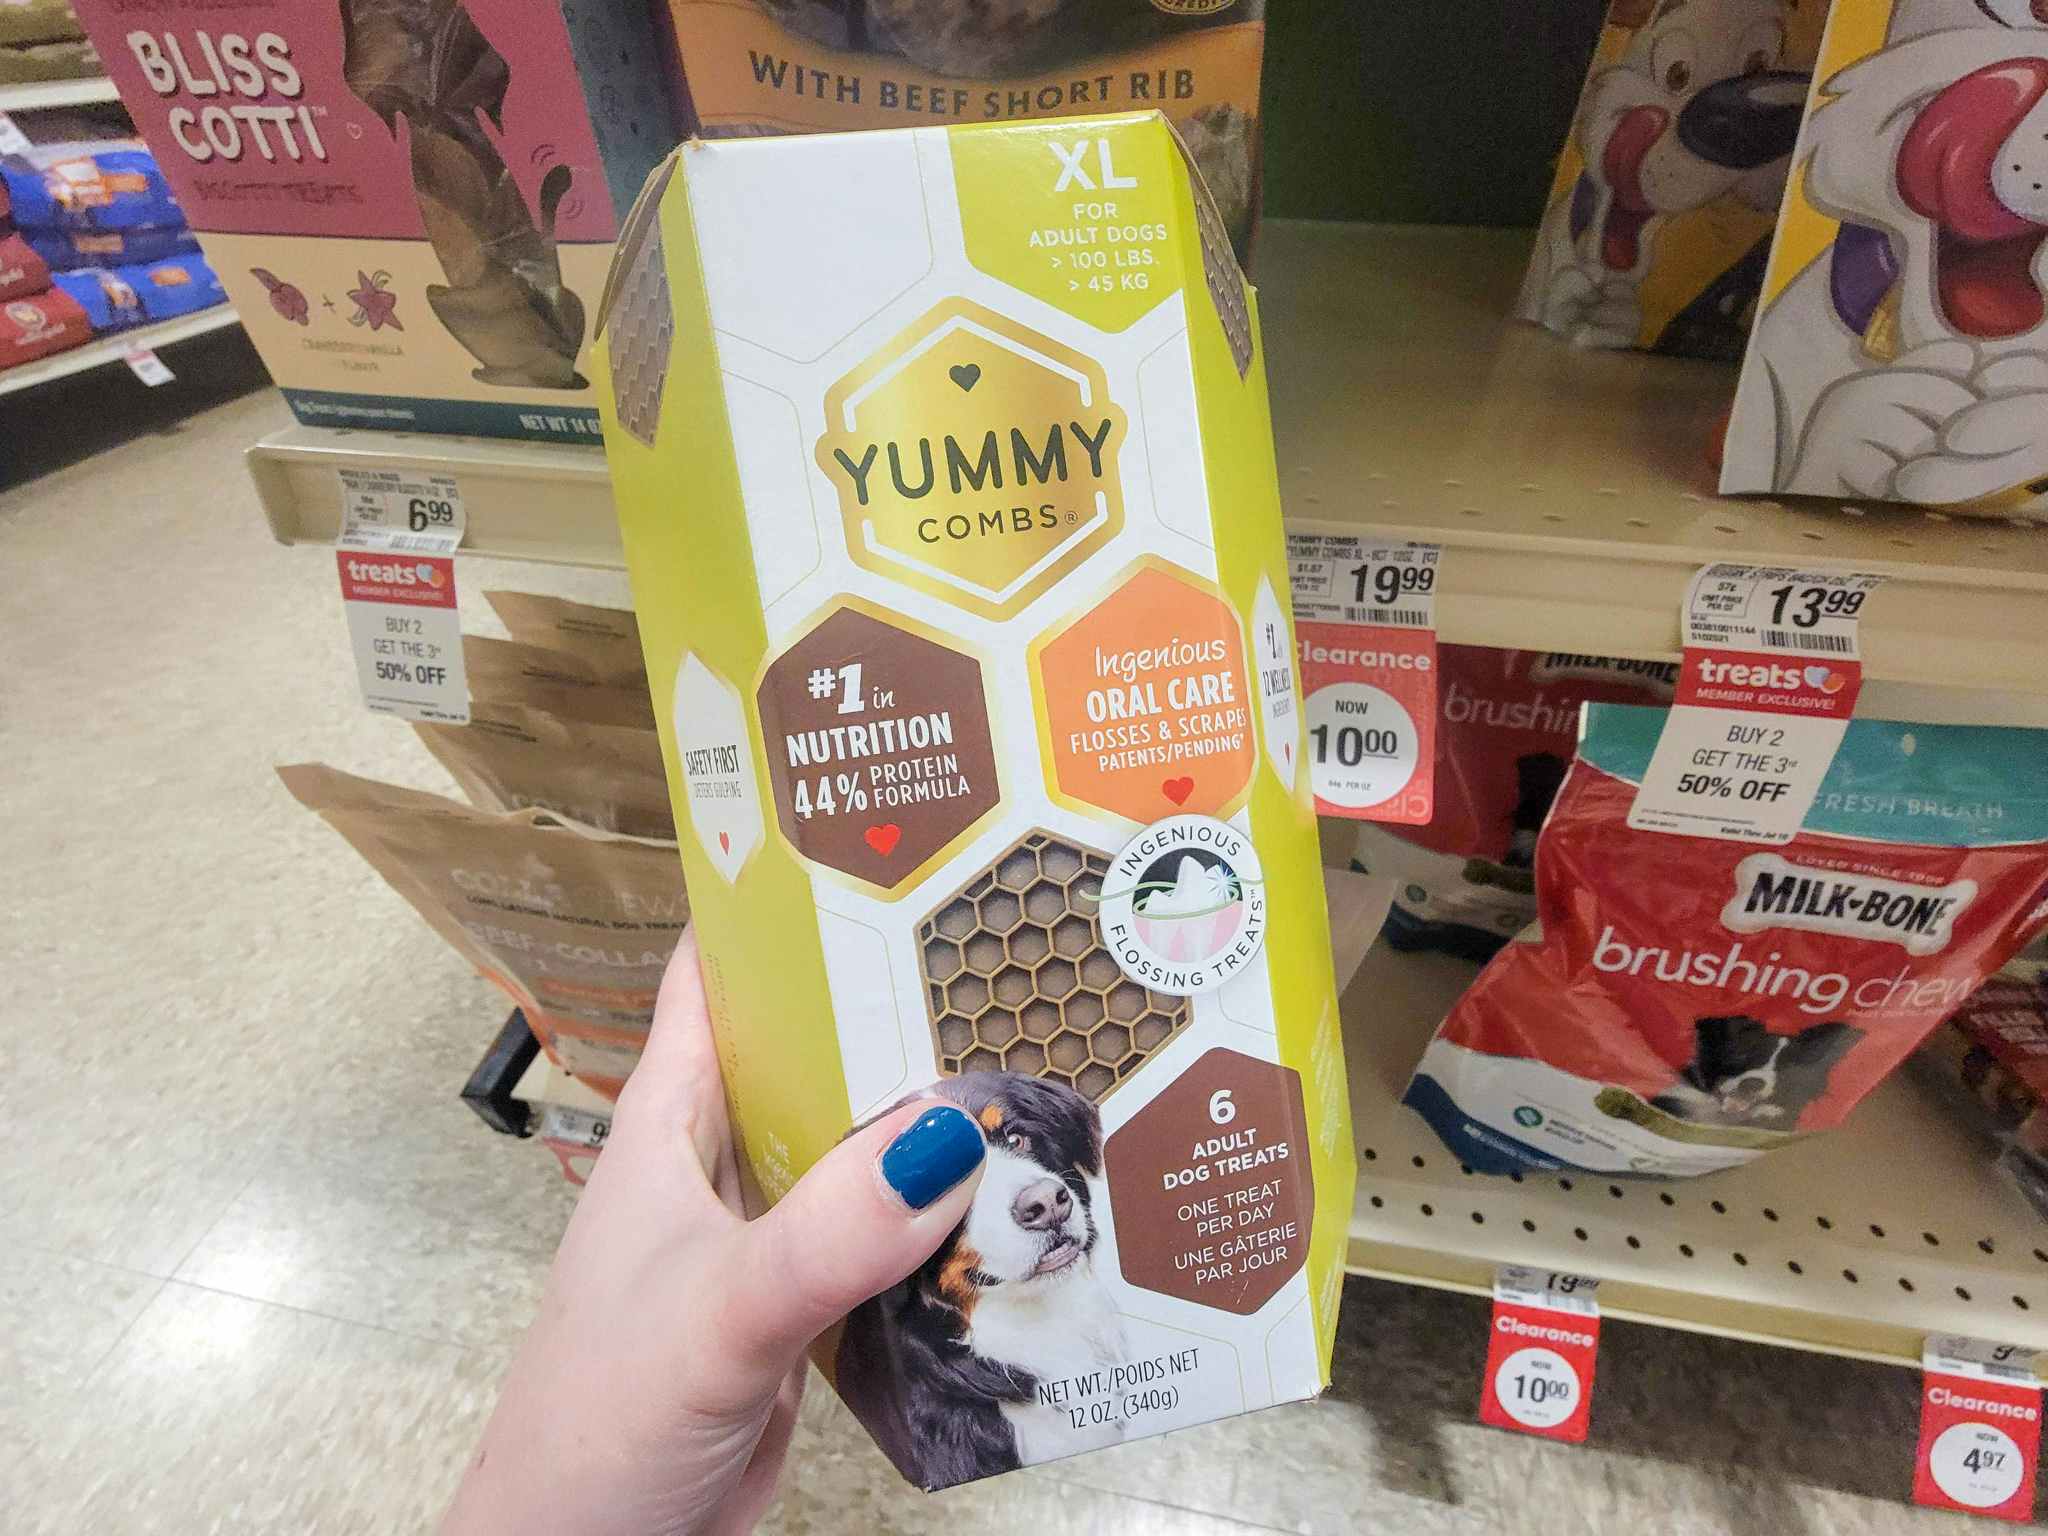 hand holding a box of yummy combs dog treats